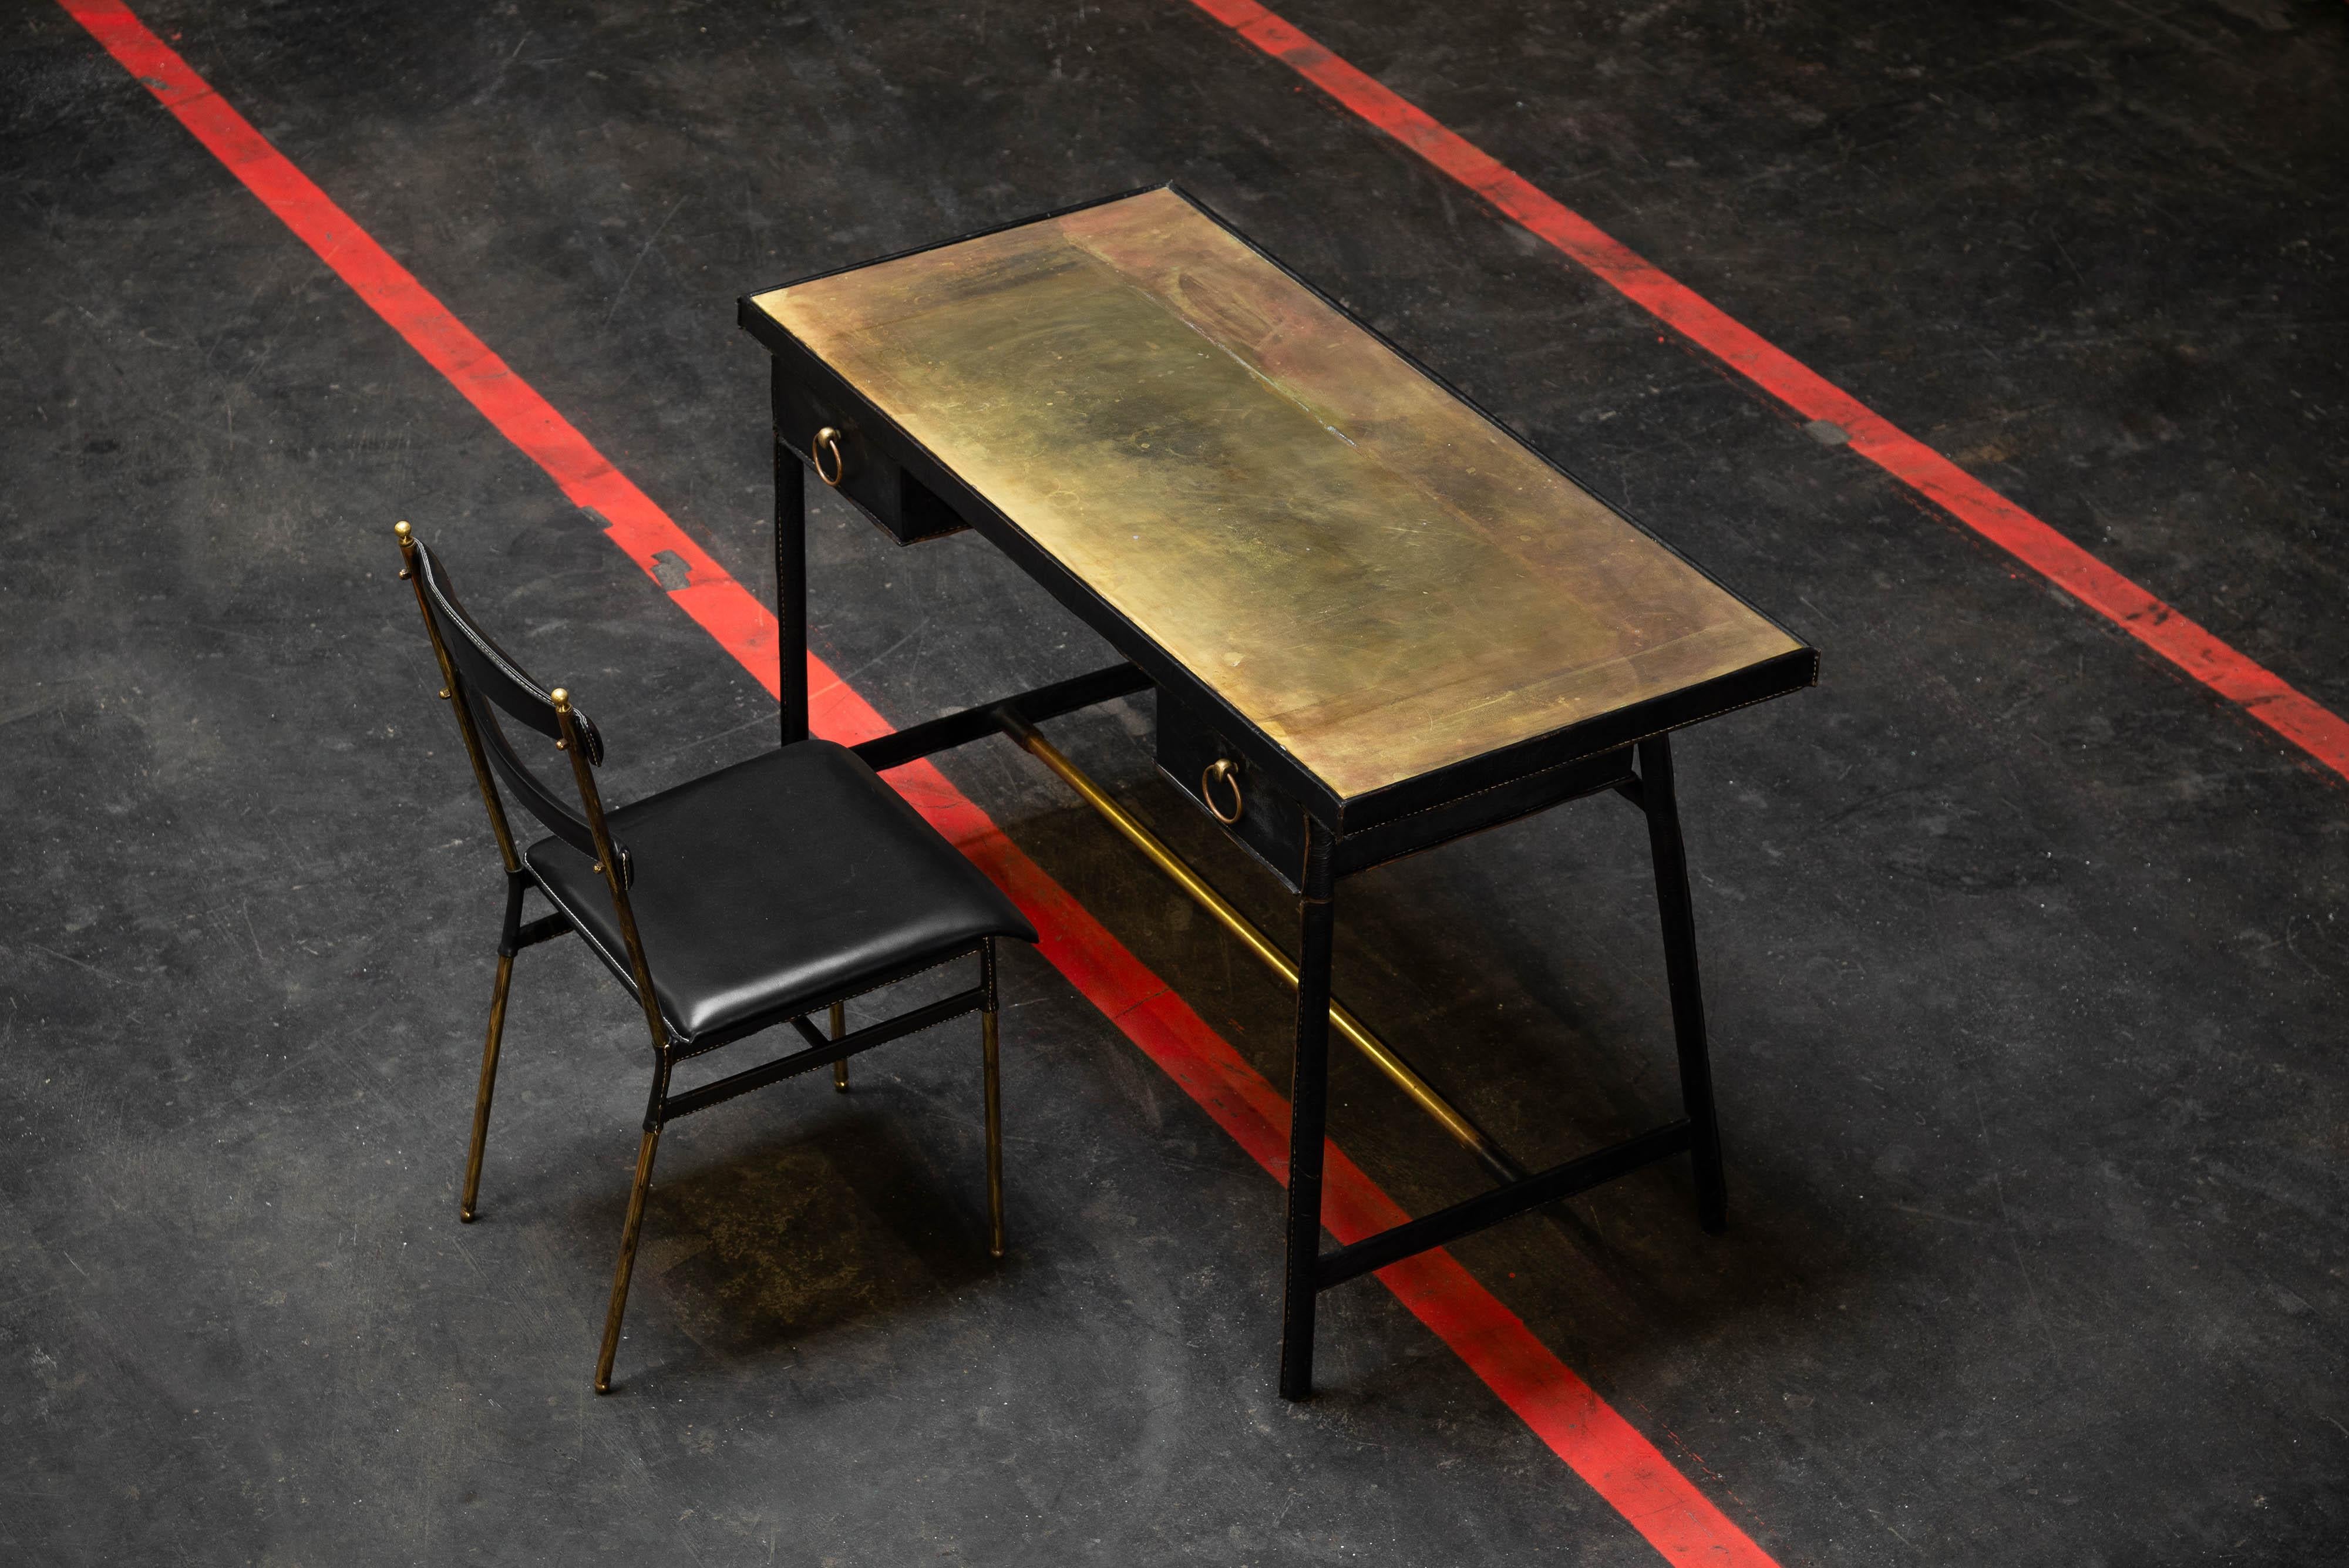 Beautiful avant garde desk designed by Jacques Adnet and manufactured in his own atelier in France in the 1950s. The frame is made from solid brass and it's all wrapped in soft black leather, giving it a classy and timeless appearance. The warm